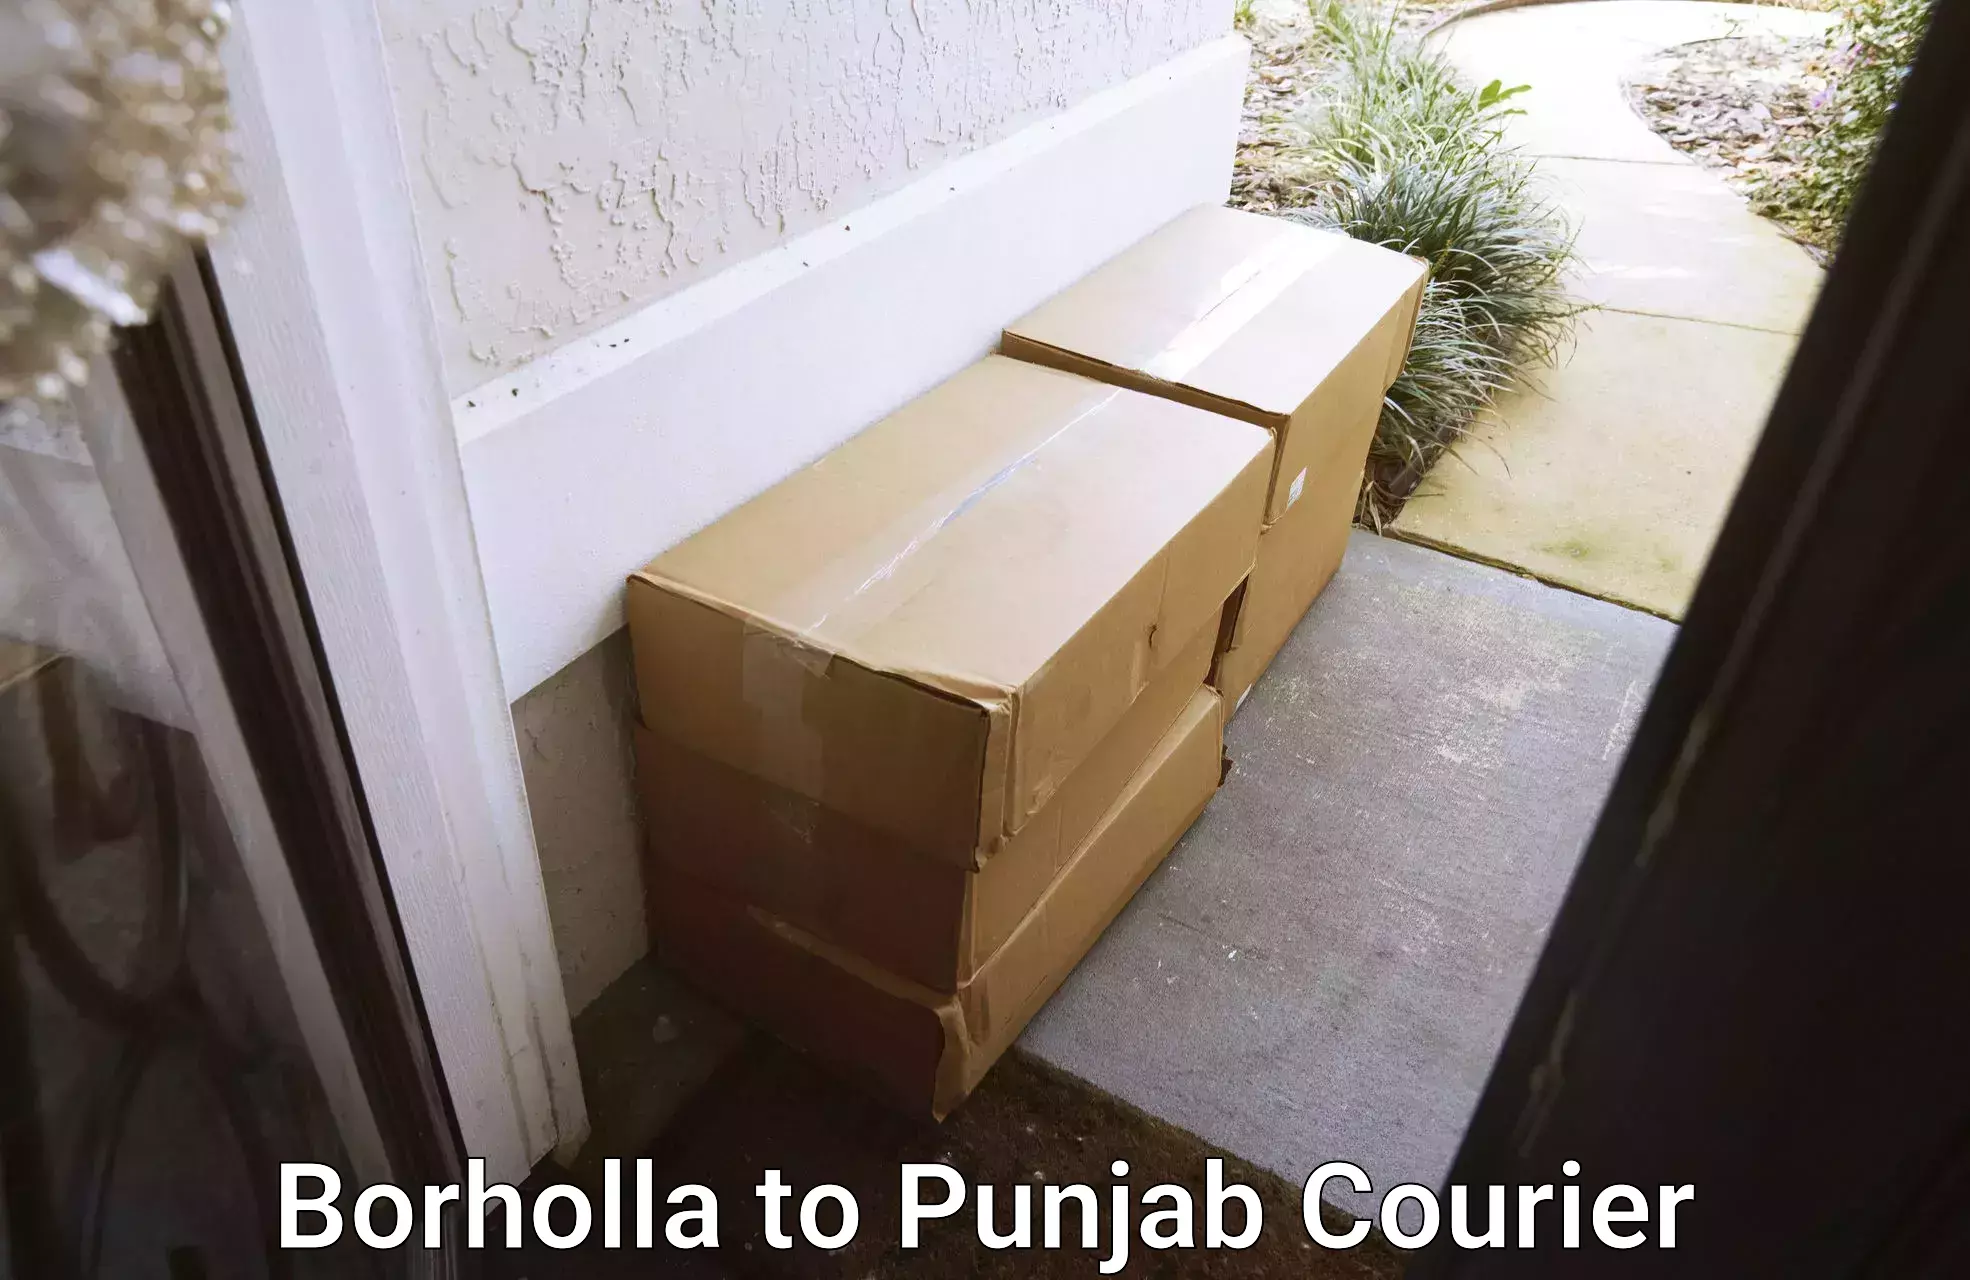 24/7 courier service in Borholla to Barnala